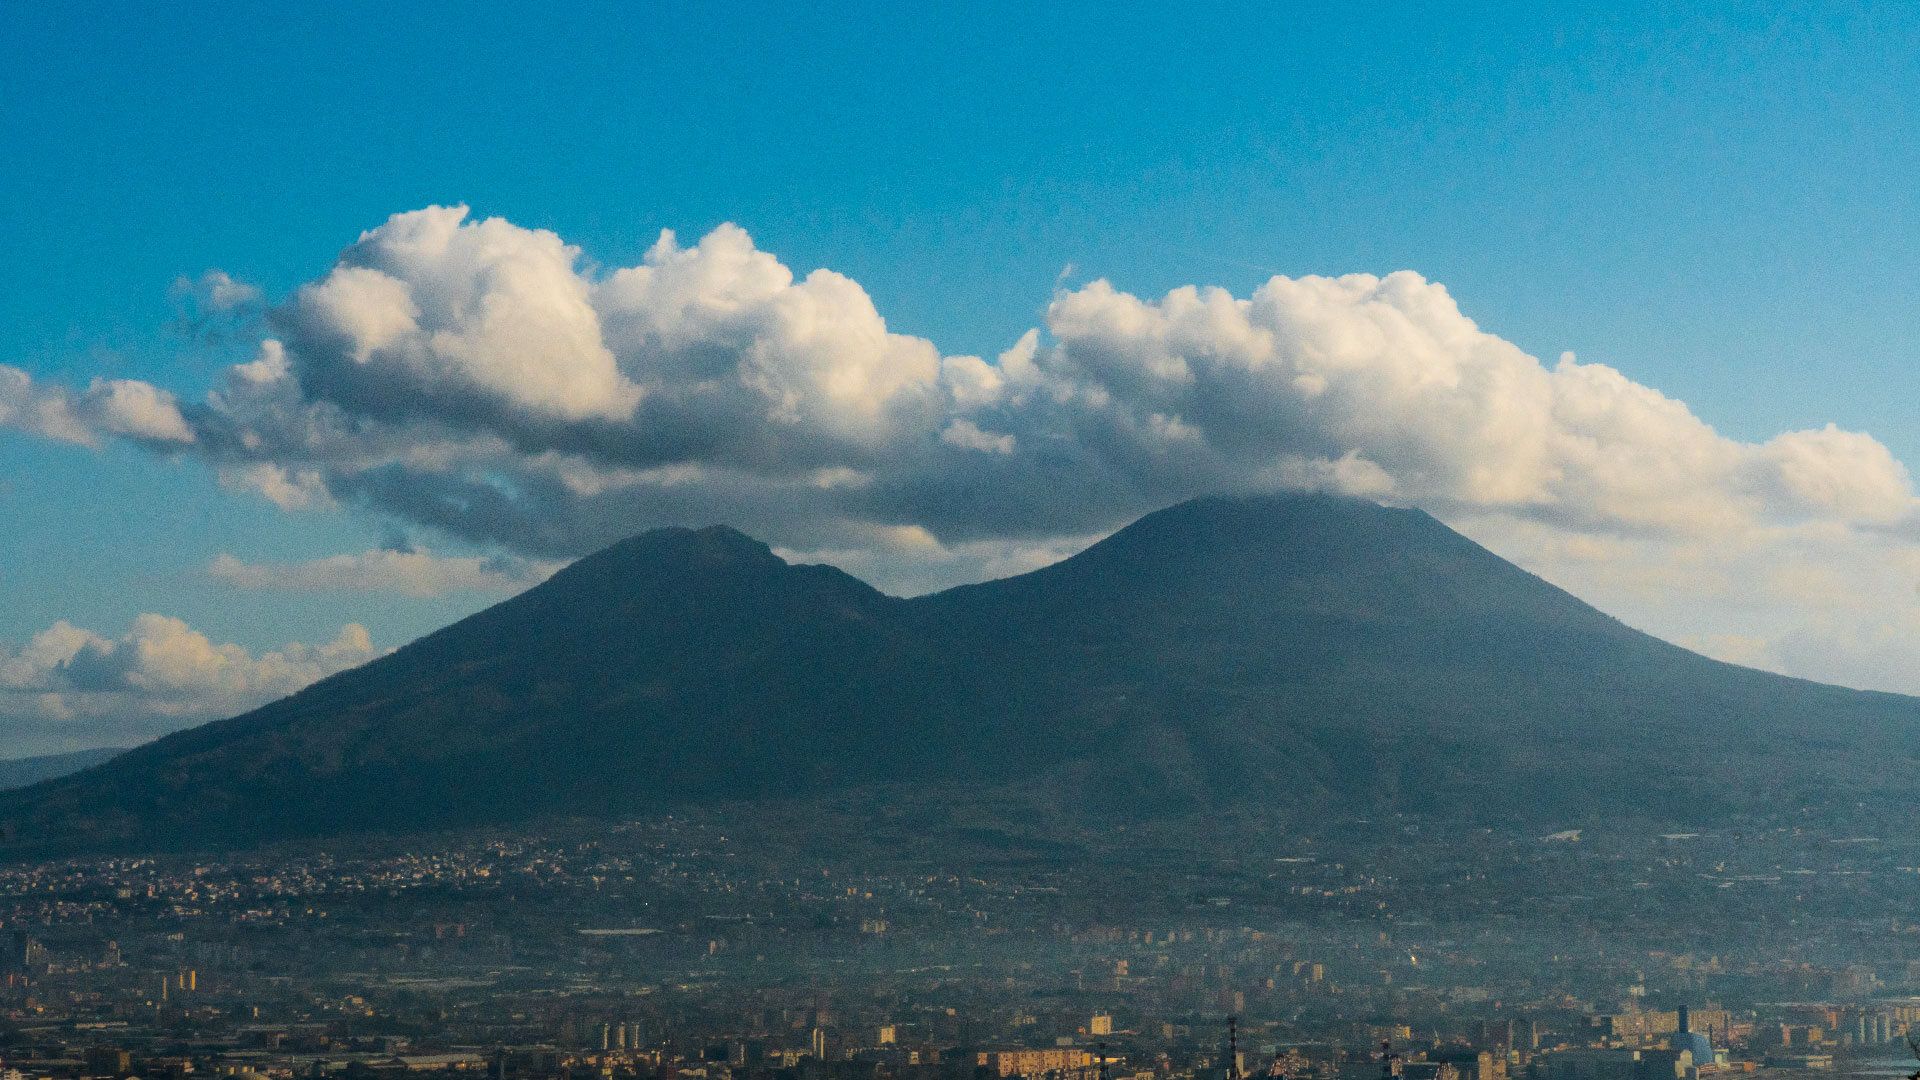 Stories told on the slopes of Vesuvius